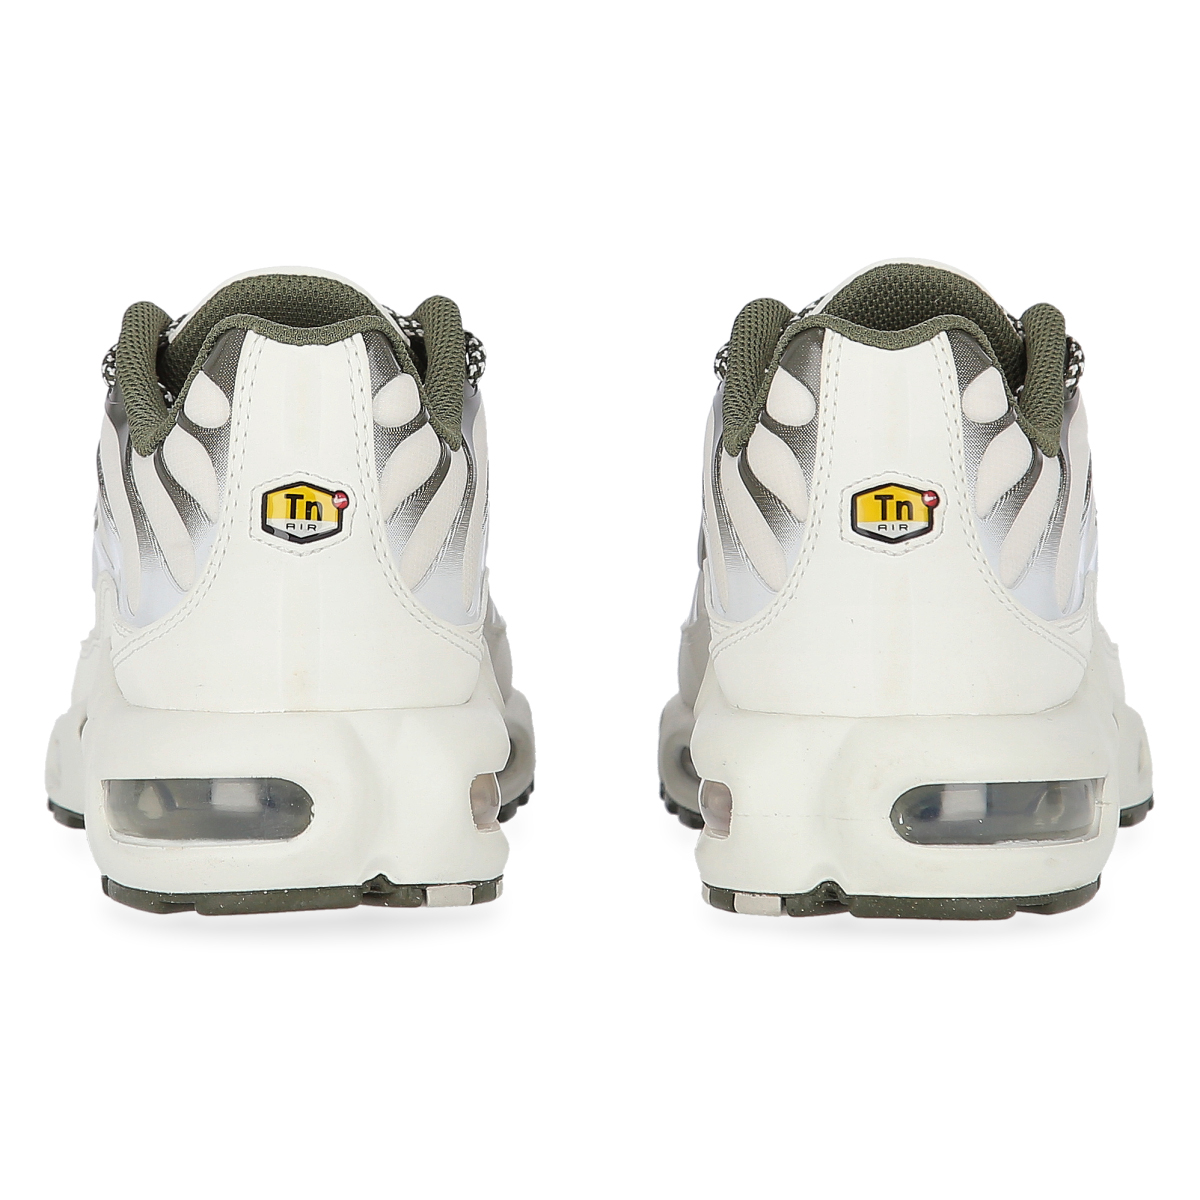 Zapatillas Nike Air Max Plus Hombre,  image number null